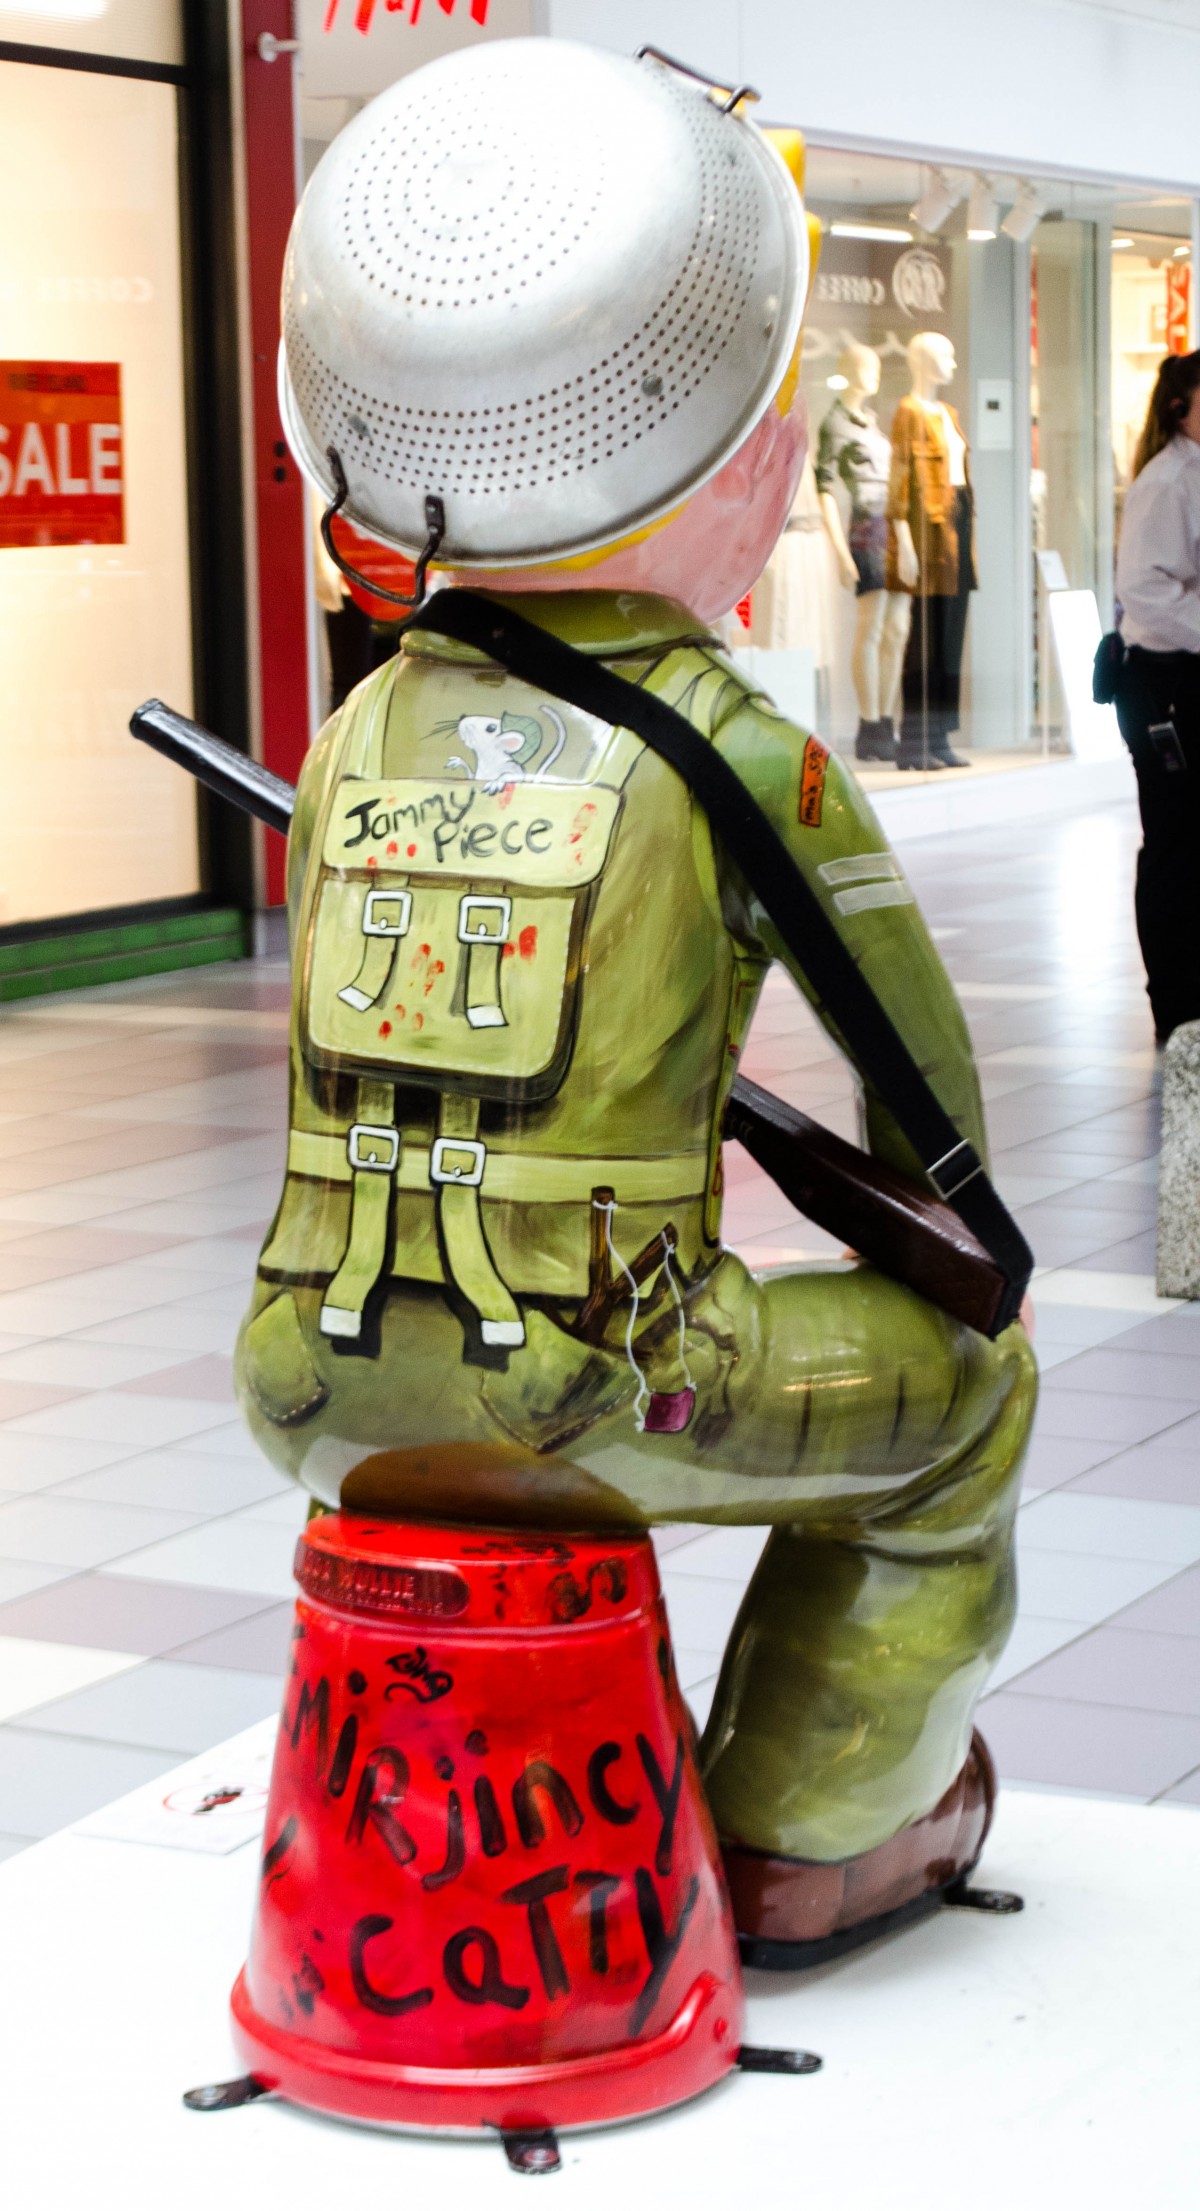 Lesley D McKenzie designed this soldier inspired Oor Wullie. This is a tribute to our soldiers present and past.